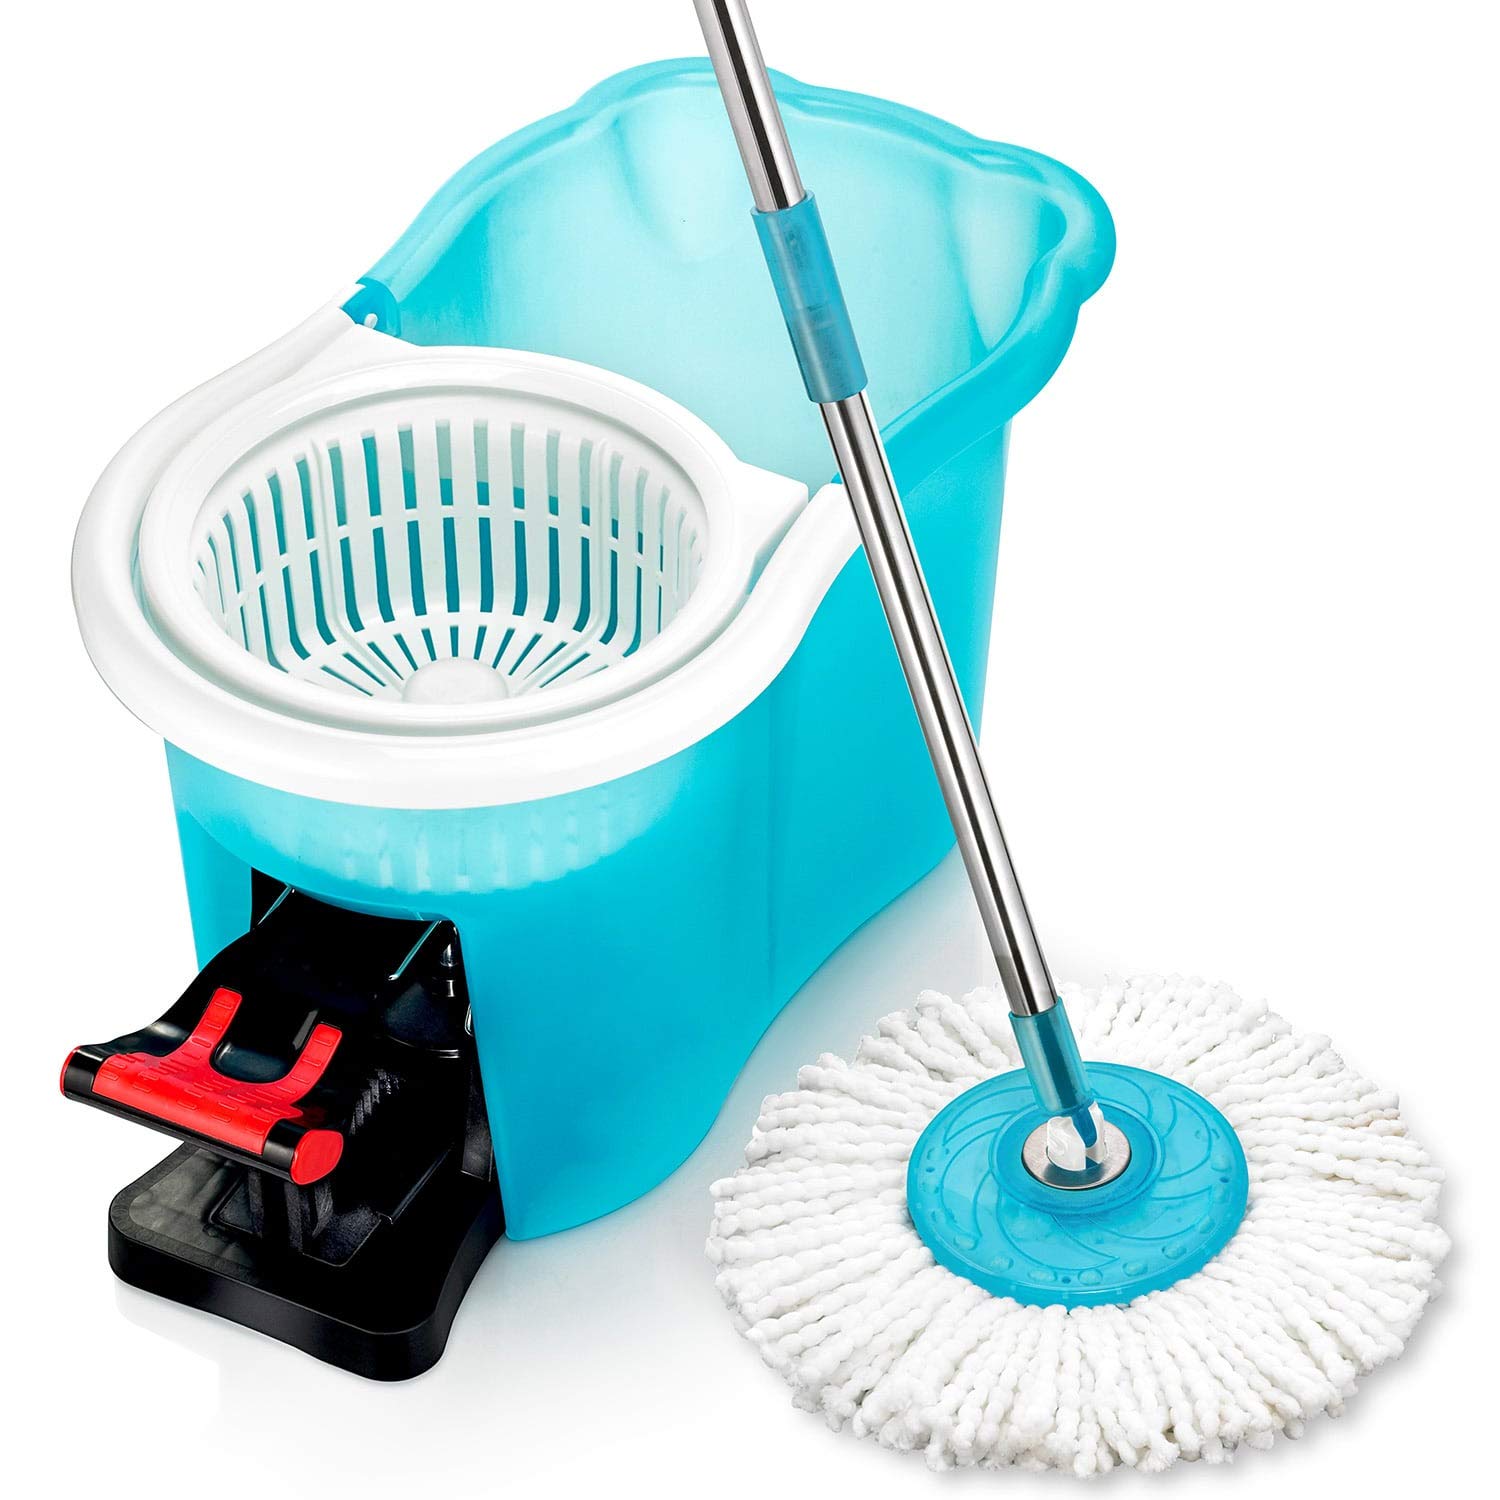 Hurricane Spin Mop As Seen On TV Mop & Bucket Cleaning System by BulbHead,  Spin Away Germy, Dirty Water - Super-Absorbent Microfiber Mop Head Holds  10X Weight, Reaches Anywhere - Pole Lays